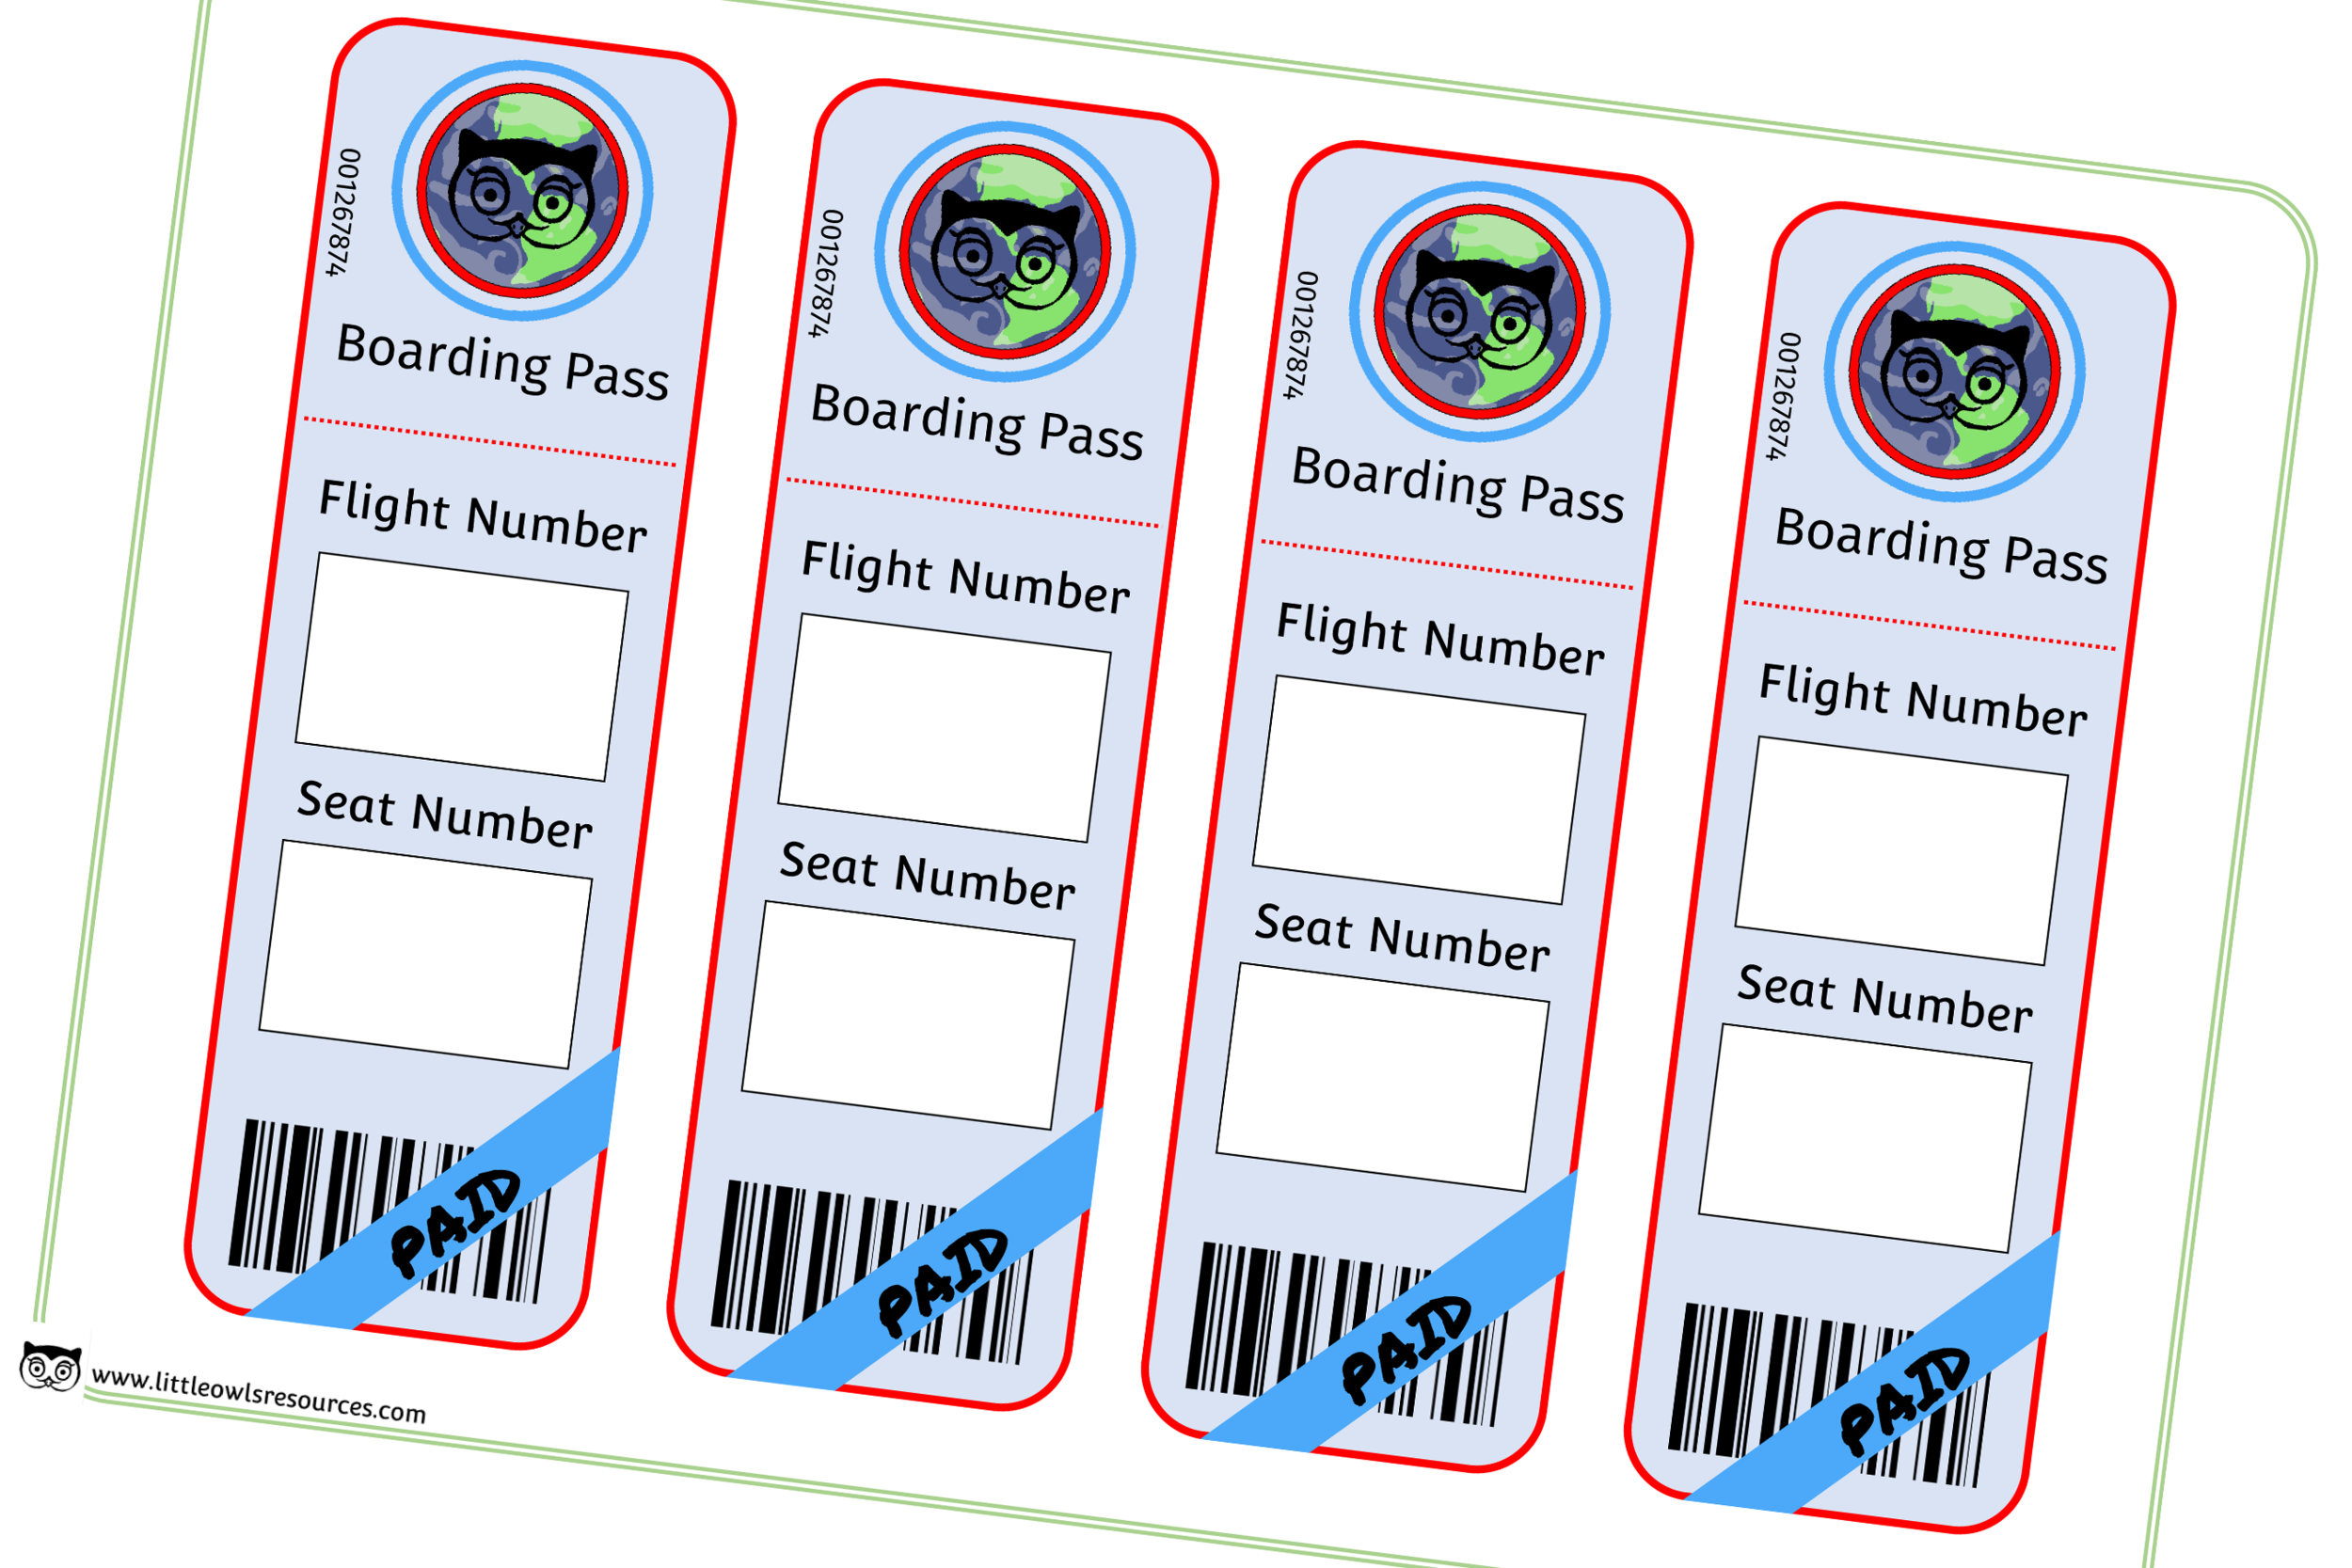 free-boarding-passes-printable-role-play-activity-template-early-years